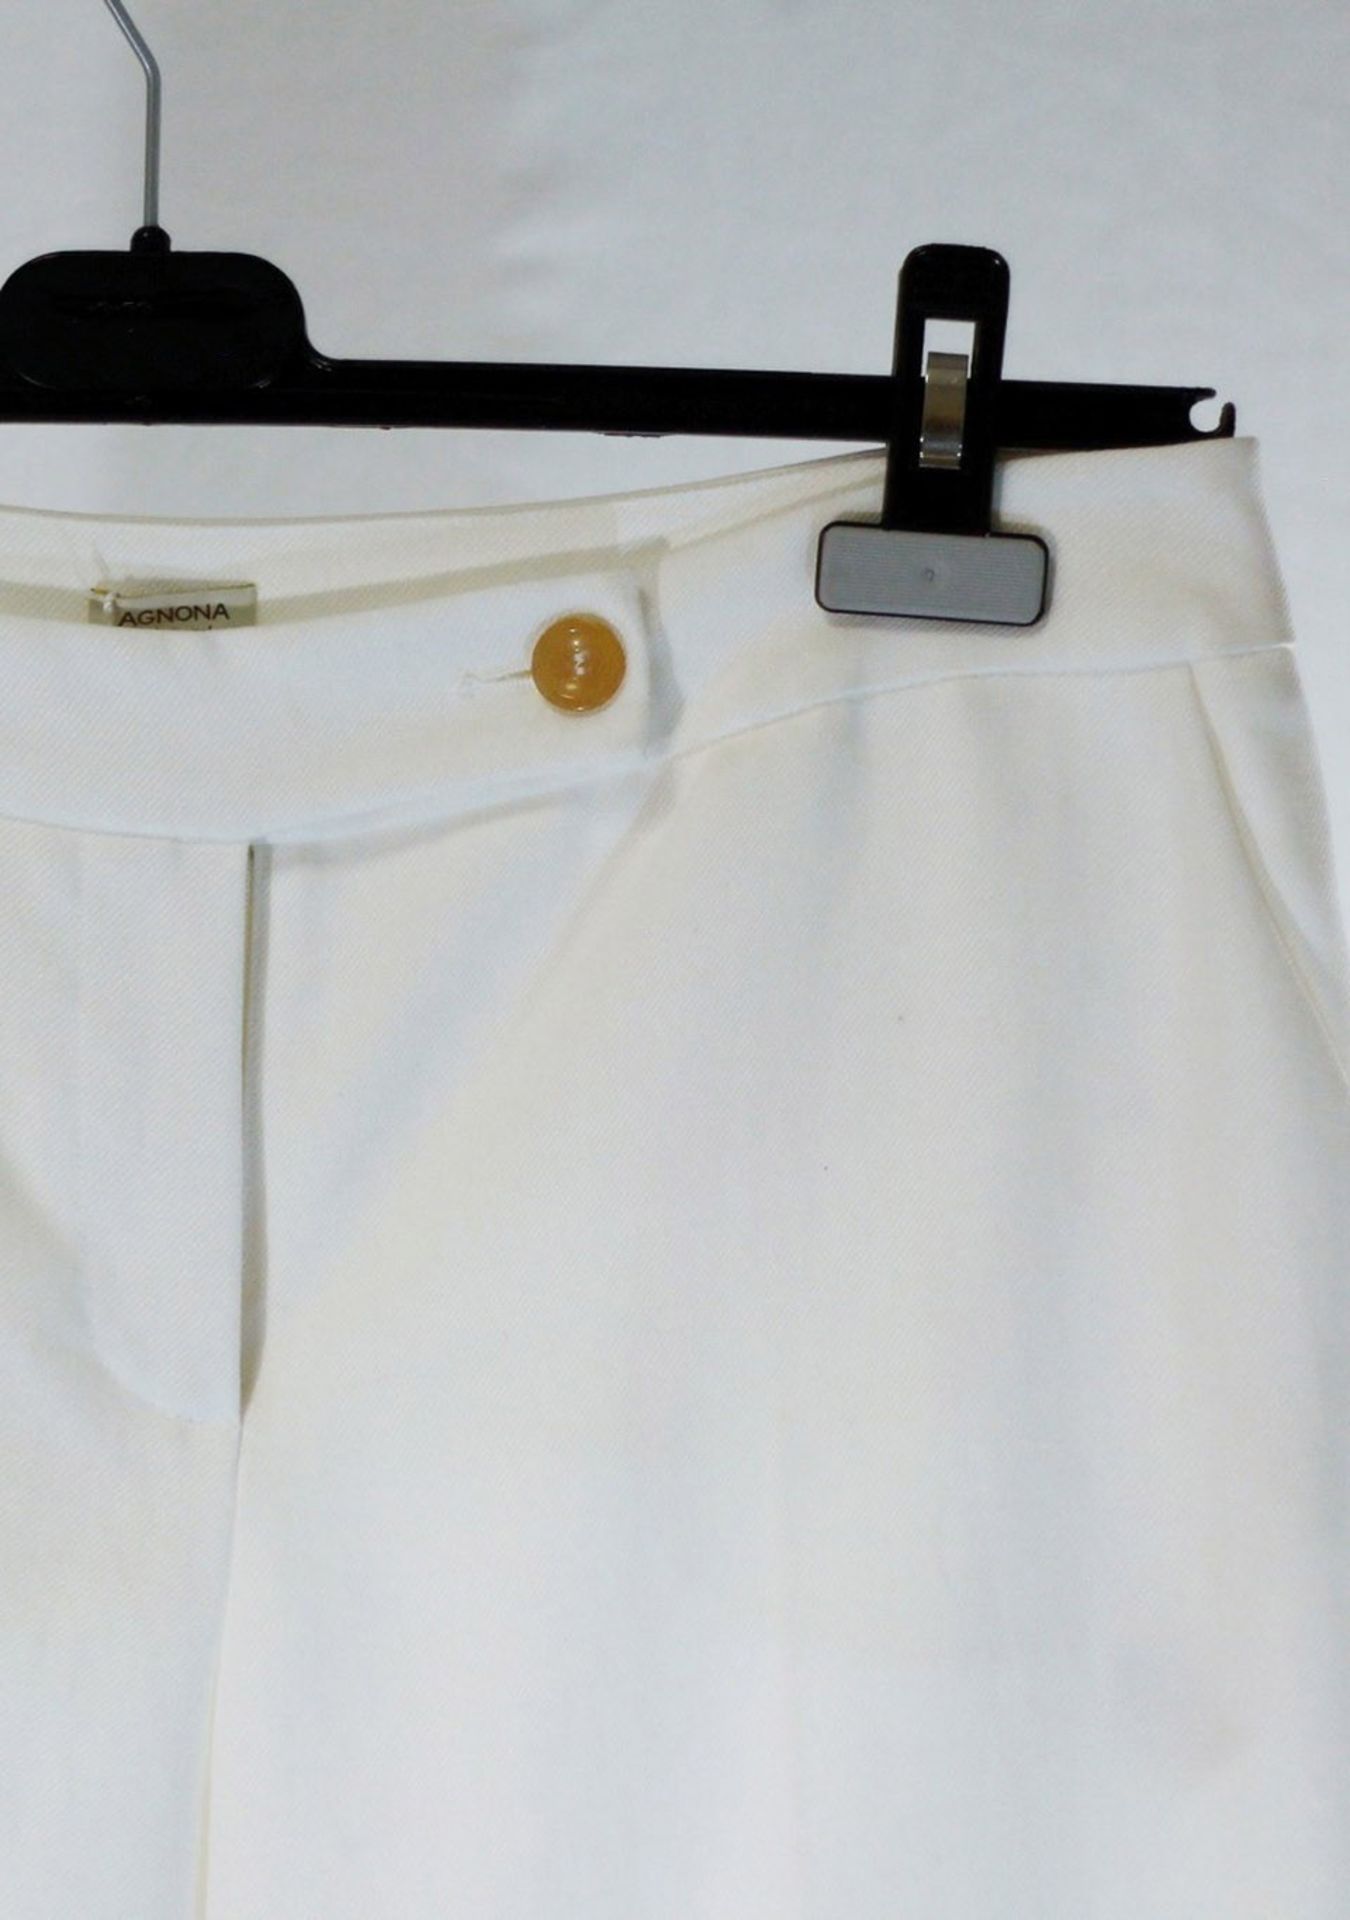 1 x Agnona White Trousers - Size: 16 - Material: 100% Ramie. Lining 52% Viscose, 48% Cotton - From a - Image 4 of 7